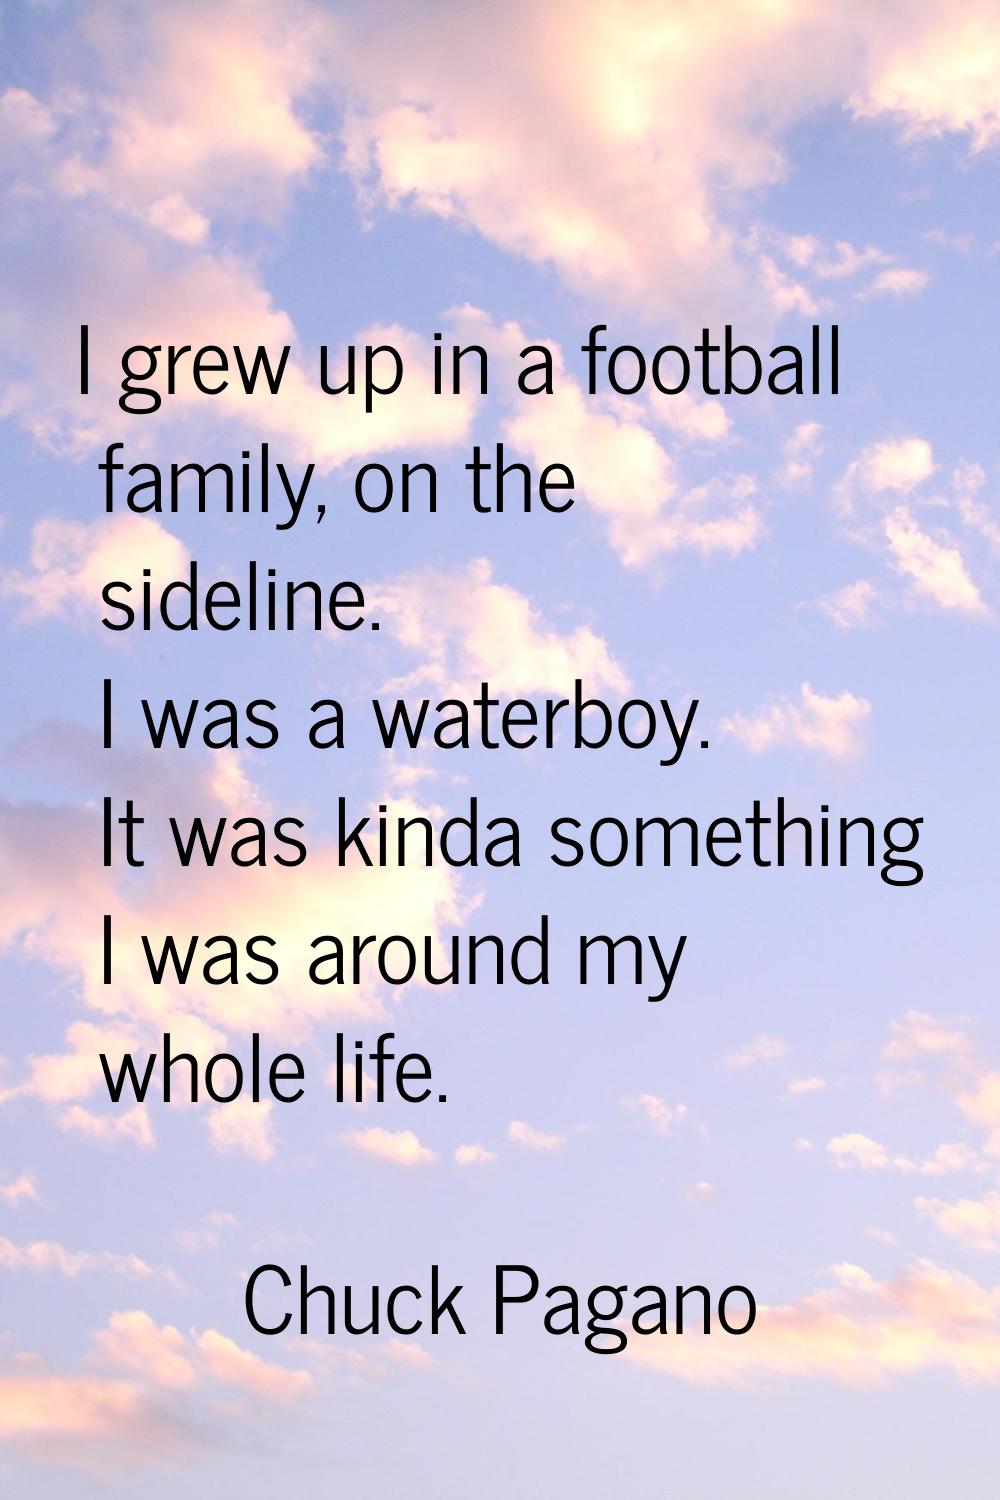 I grew up in a football family, on the sideline. I was a waterboy. It was kinda something I was aro